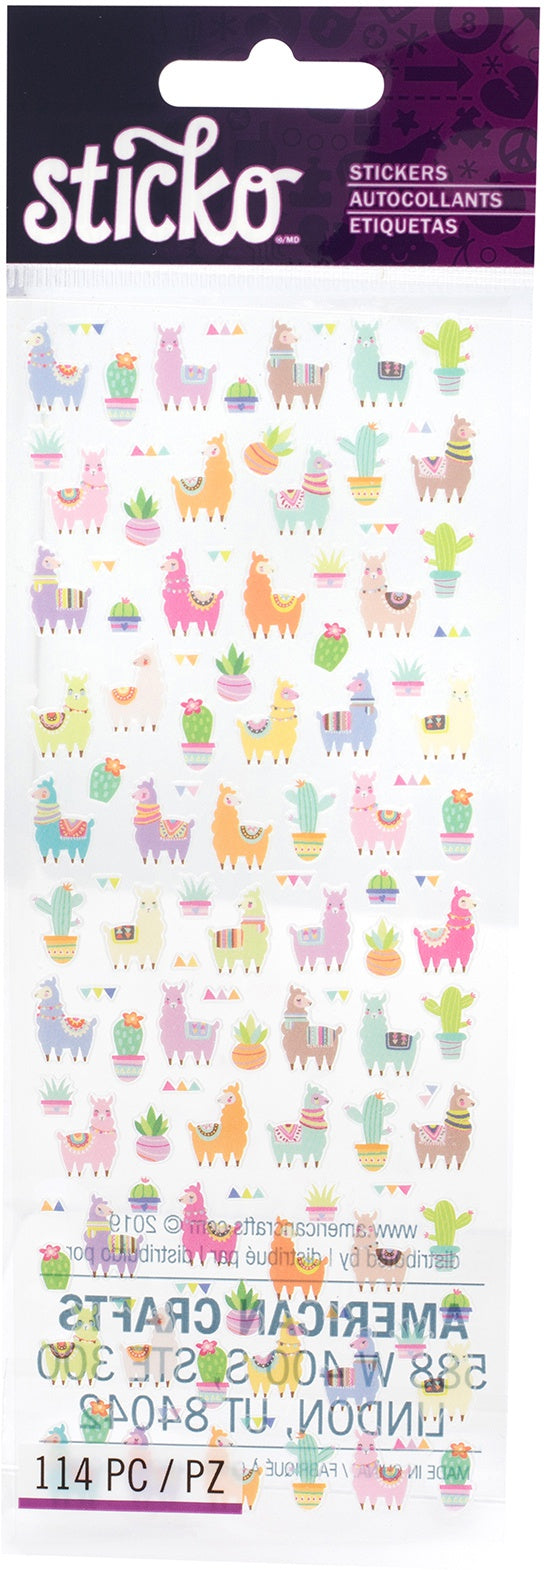 Sticko Stickers-Cats & Dogs – American Crafts